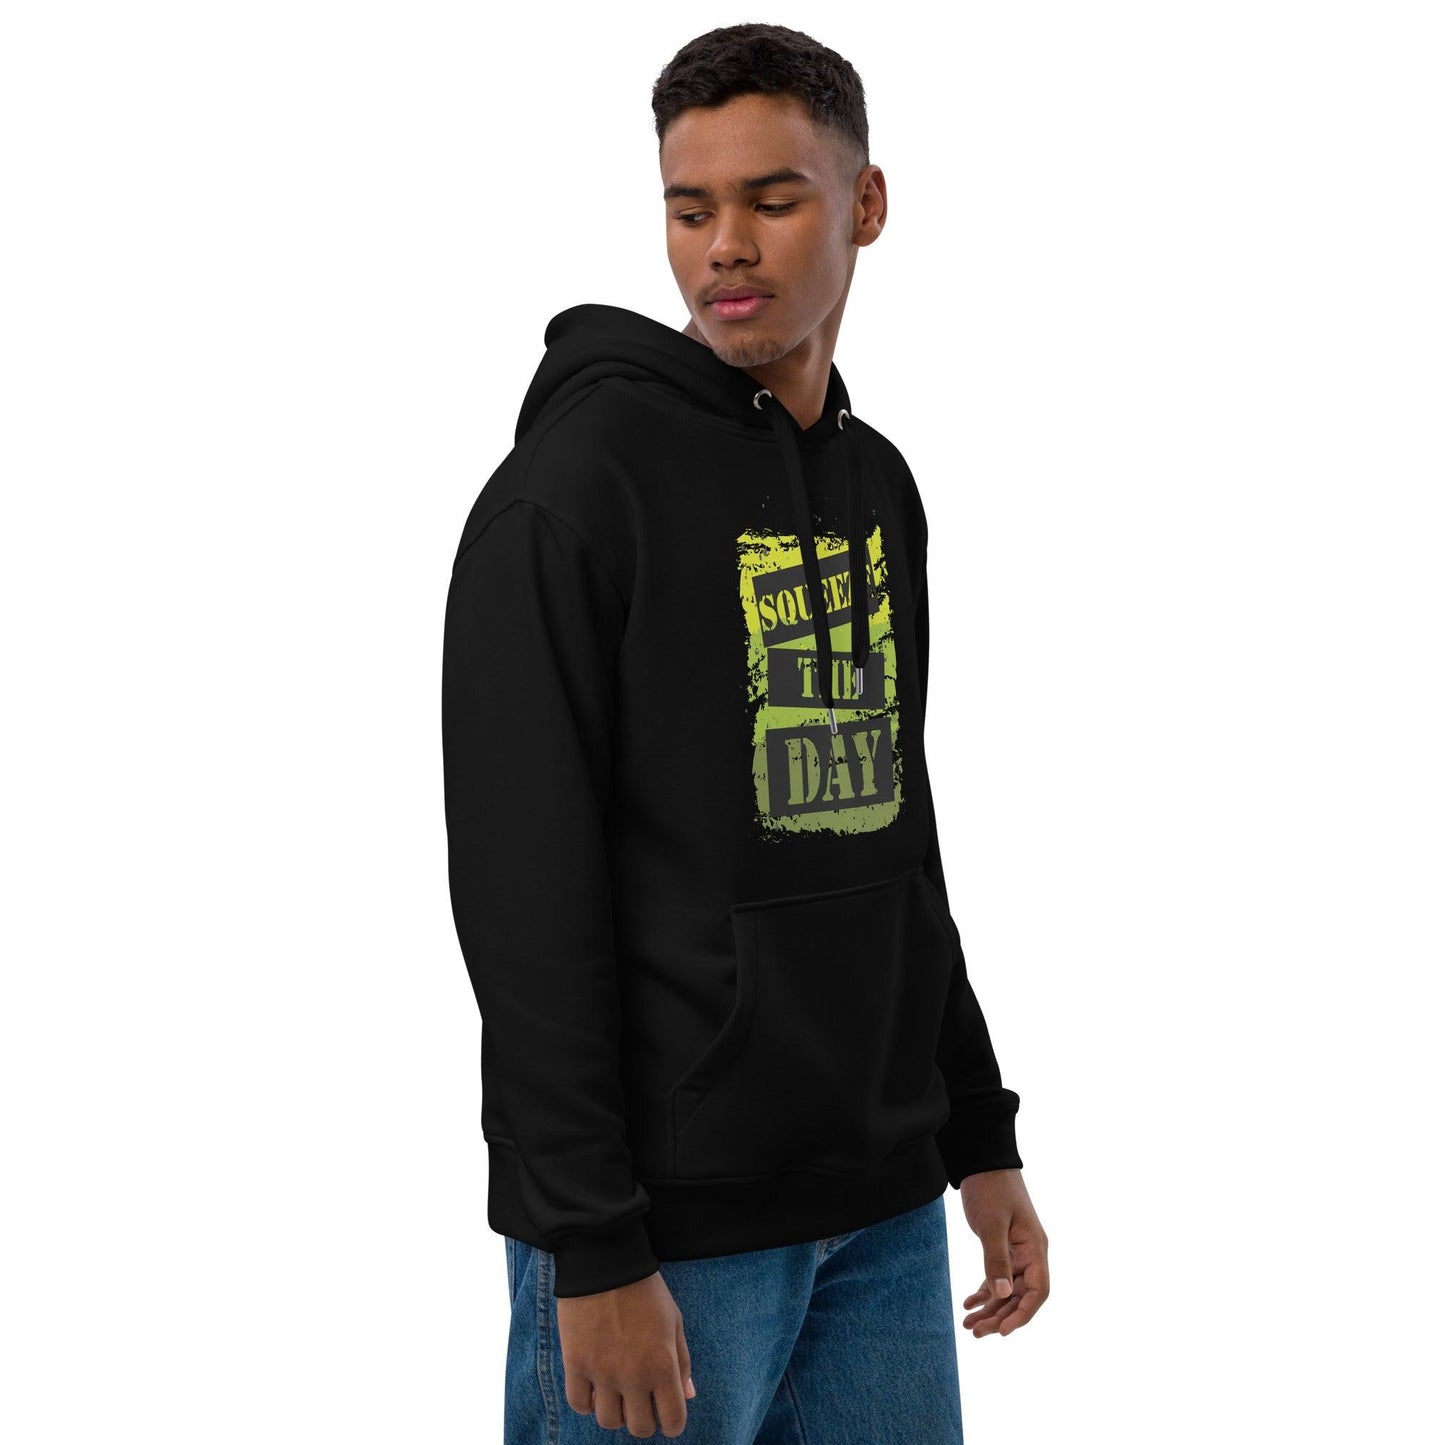 Premium eco hoodie Squeeze the Day - SC Filtration